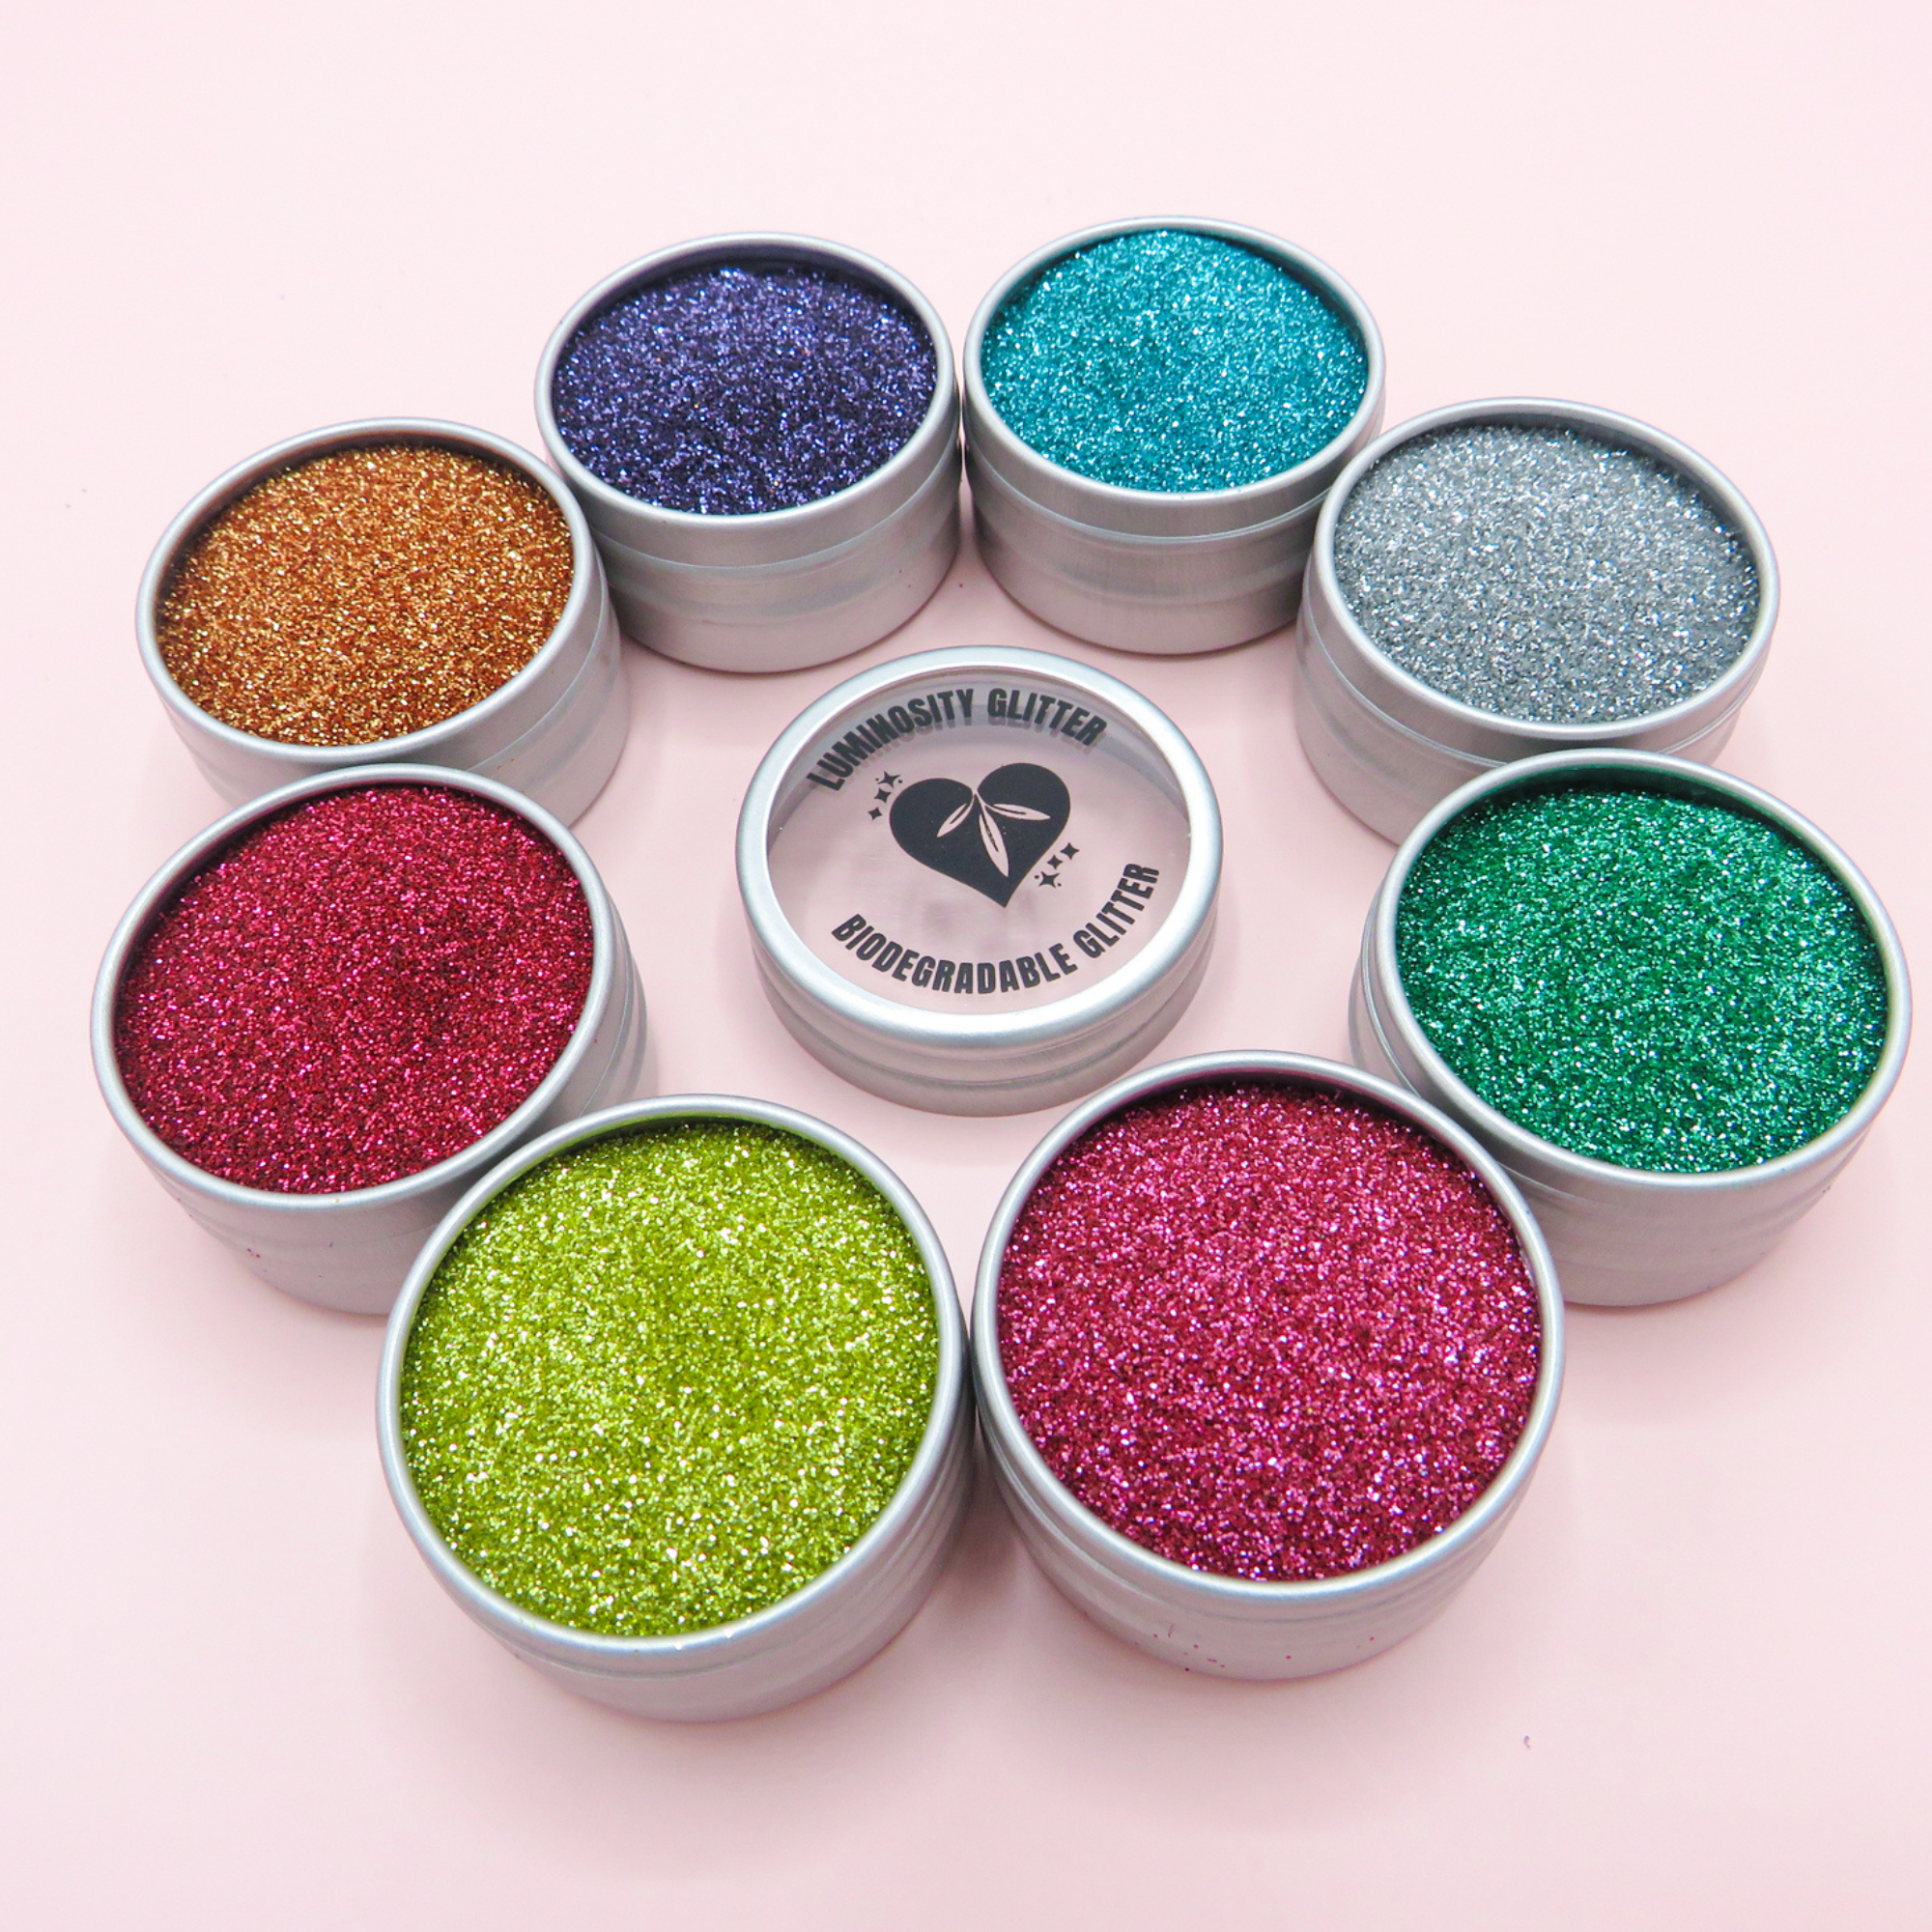 Set of biodegradable glitters in fine flake size for makeup, glitter nails and glitter tattoos 